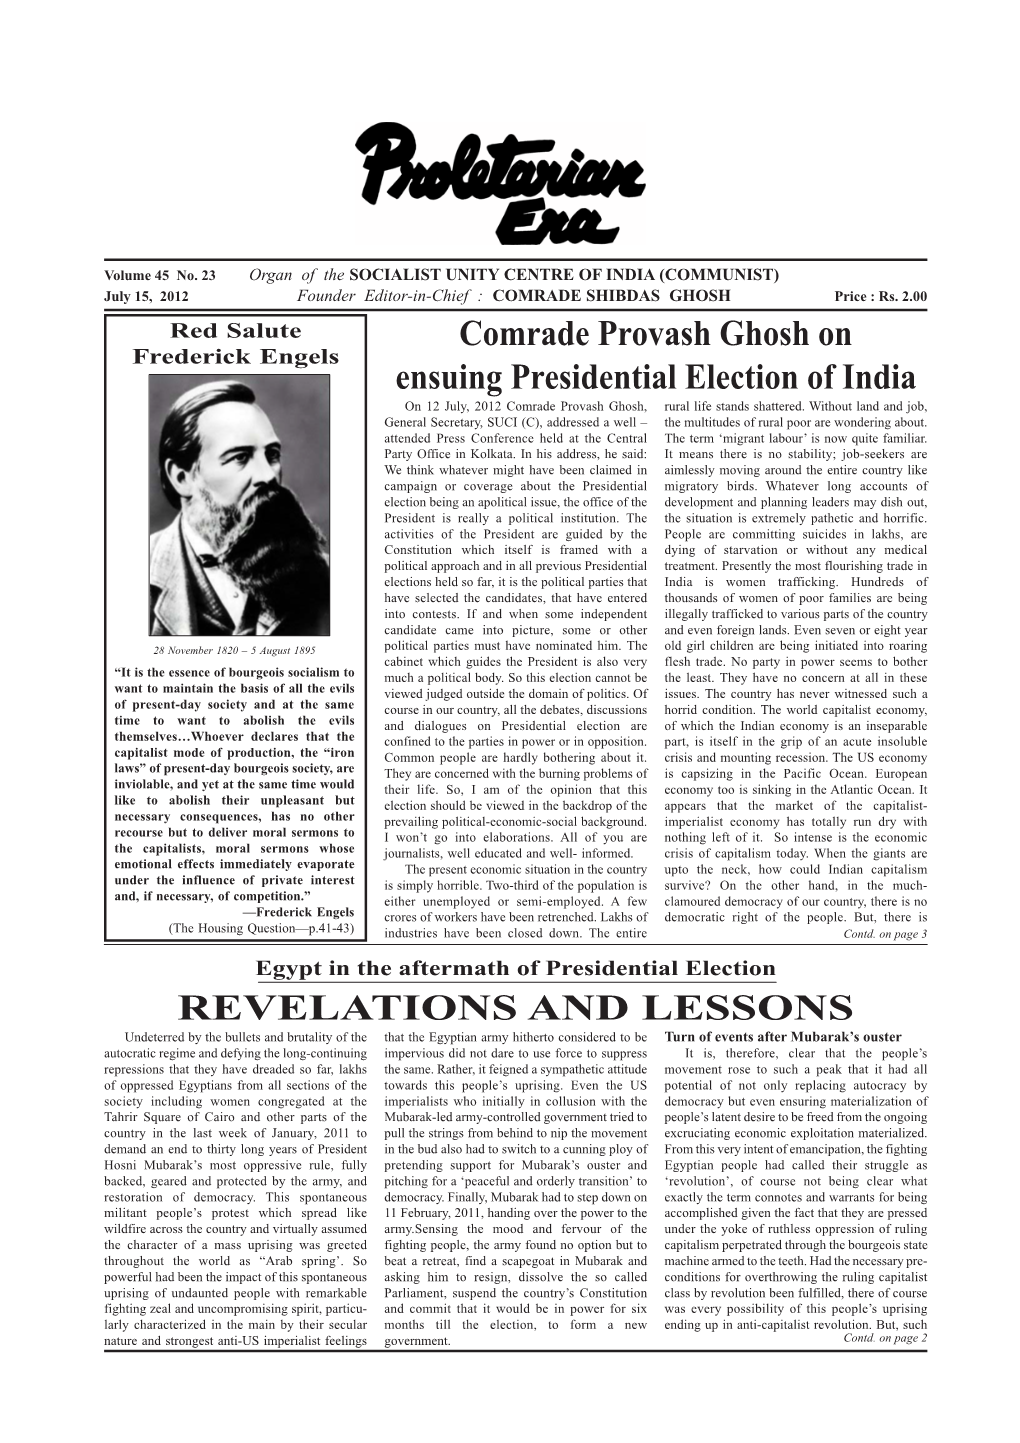 Comrade Provash Ghosh on Ensuing Presidential Election of India